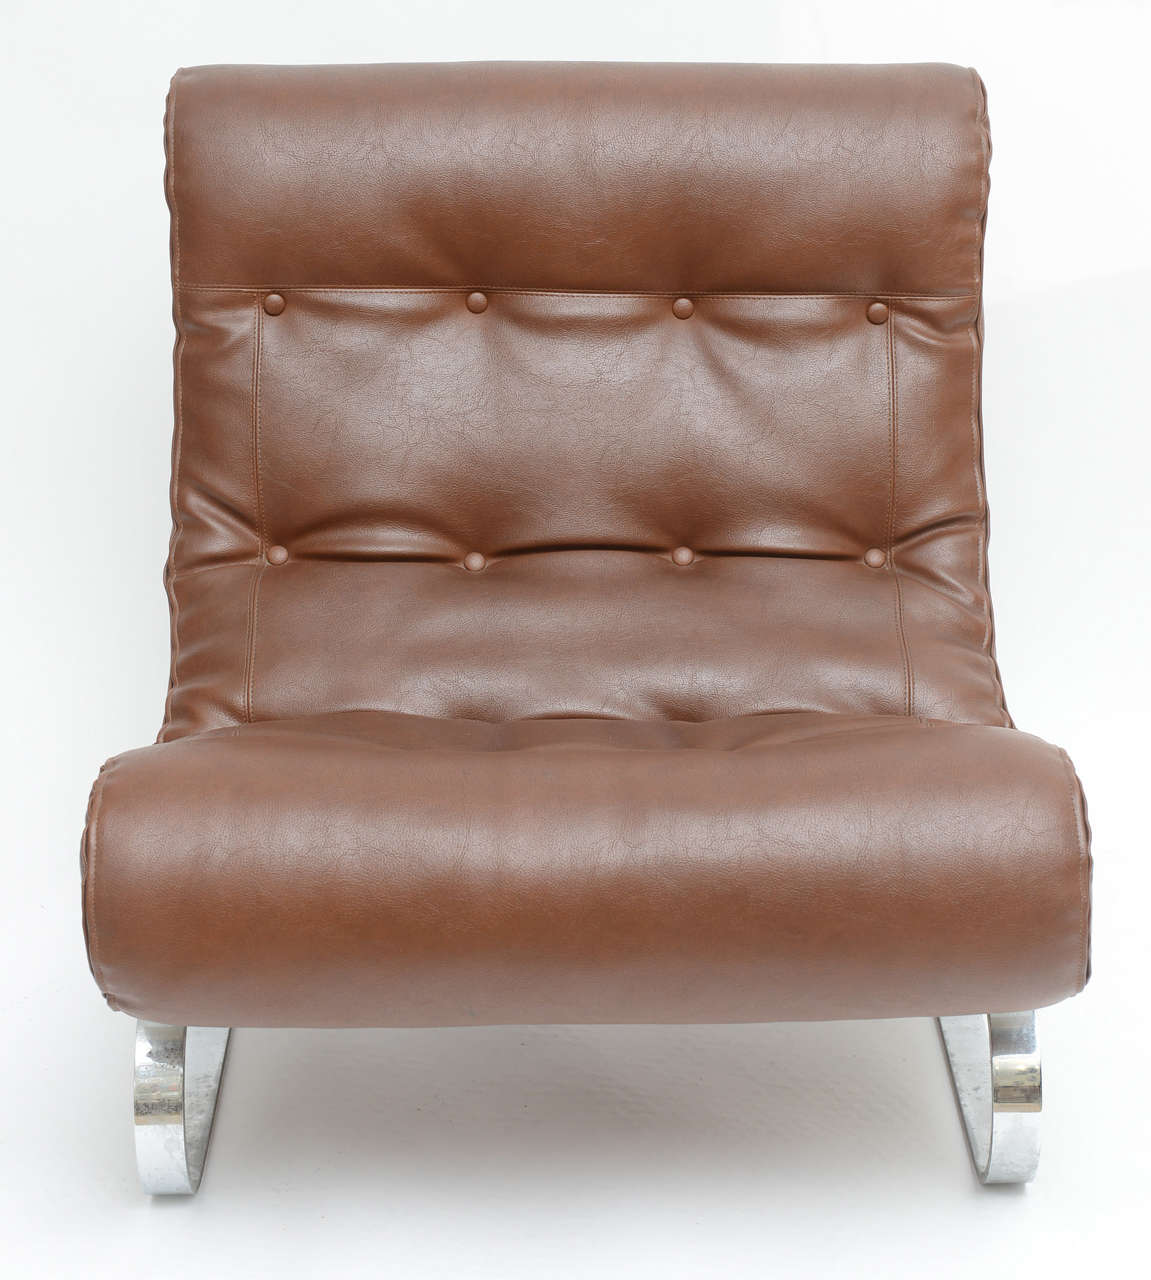 Pair of Forma Nova club lounge chairs on flat chromed steel base. A C-curved self stabilizing base with brown leather, outer fitting of seat cushion has a zipper surround, in order to remove, clean or change out the insert.